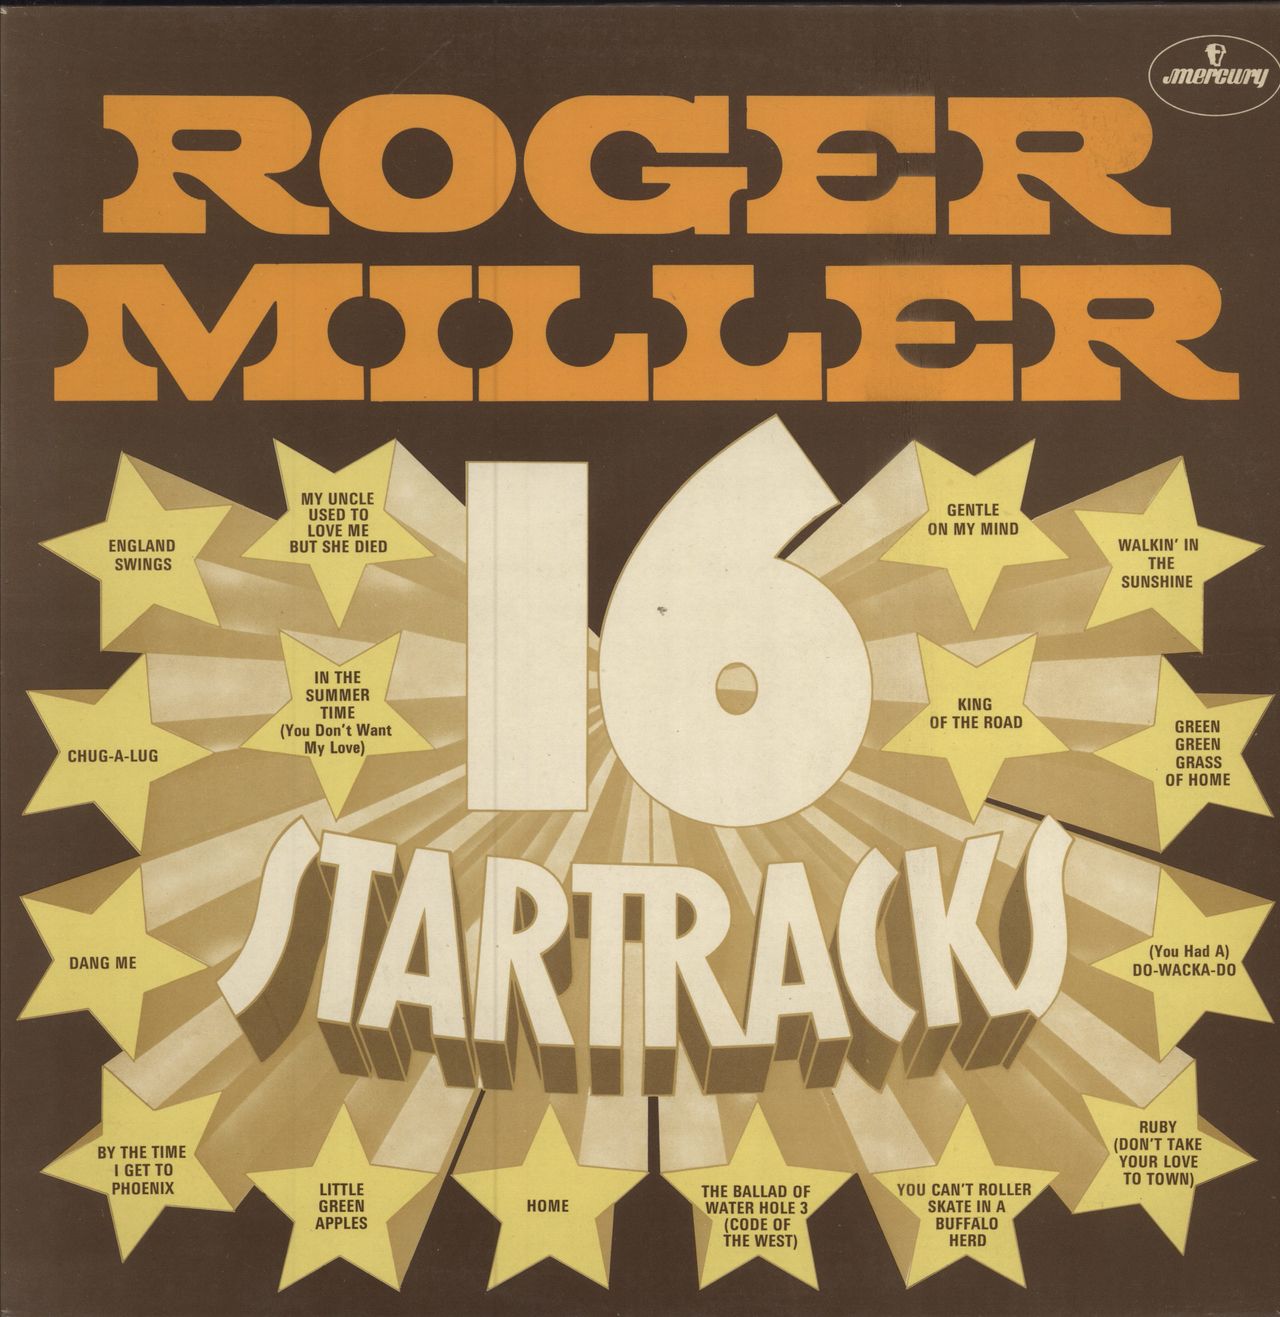 Roger Miller: My Uncle Used To Love Me But She Died / You're My